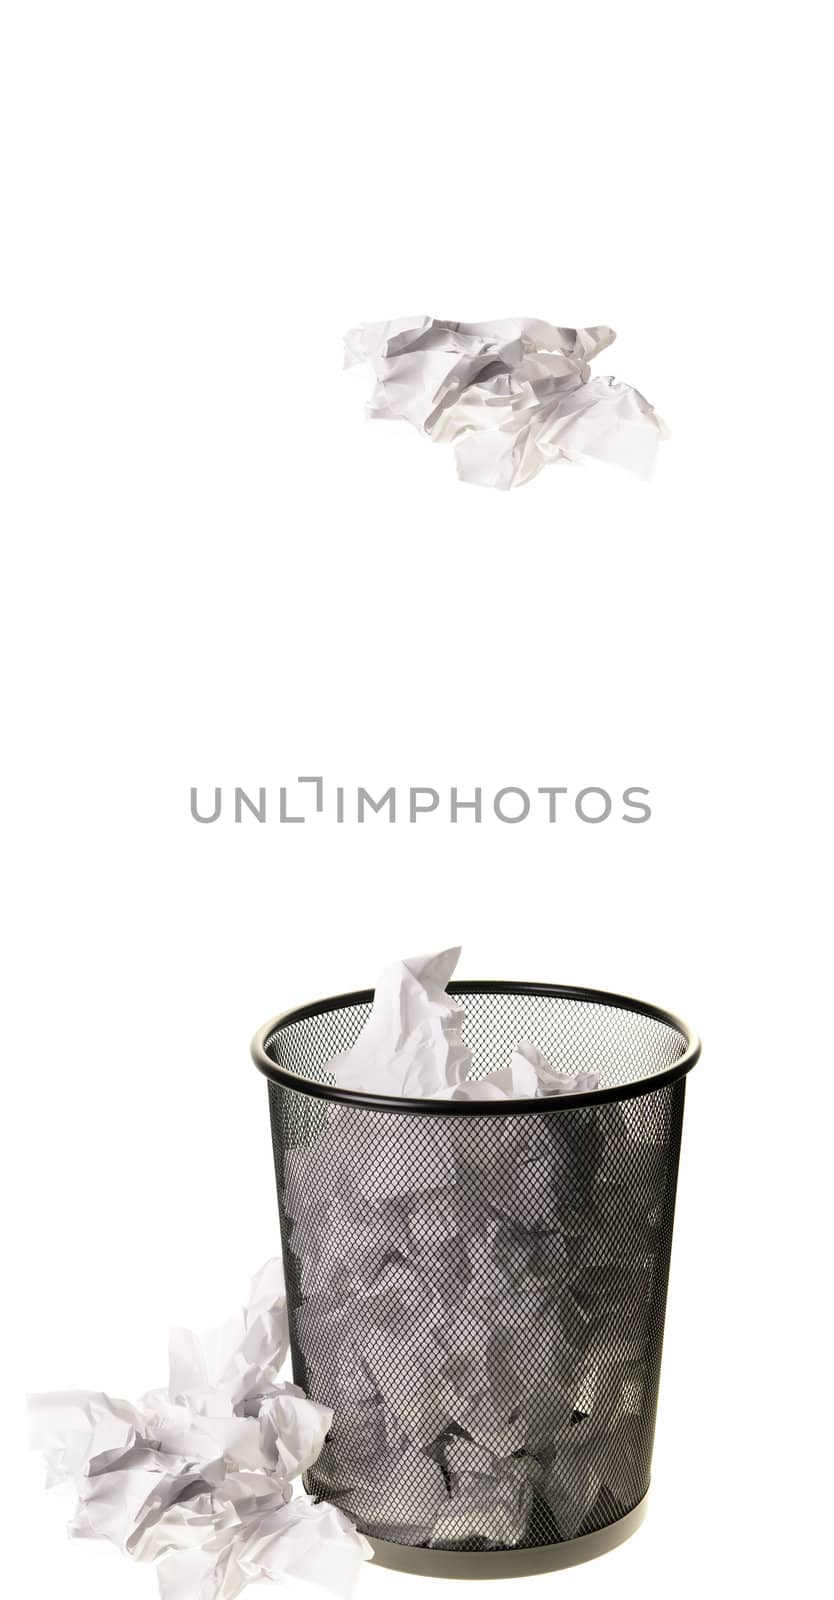 Paper being tossed into a garbage can, isolated on a white background.